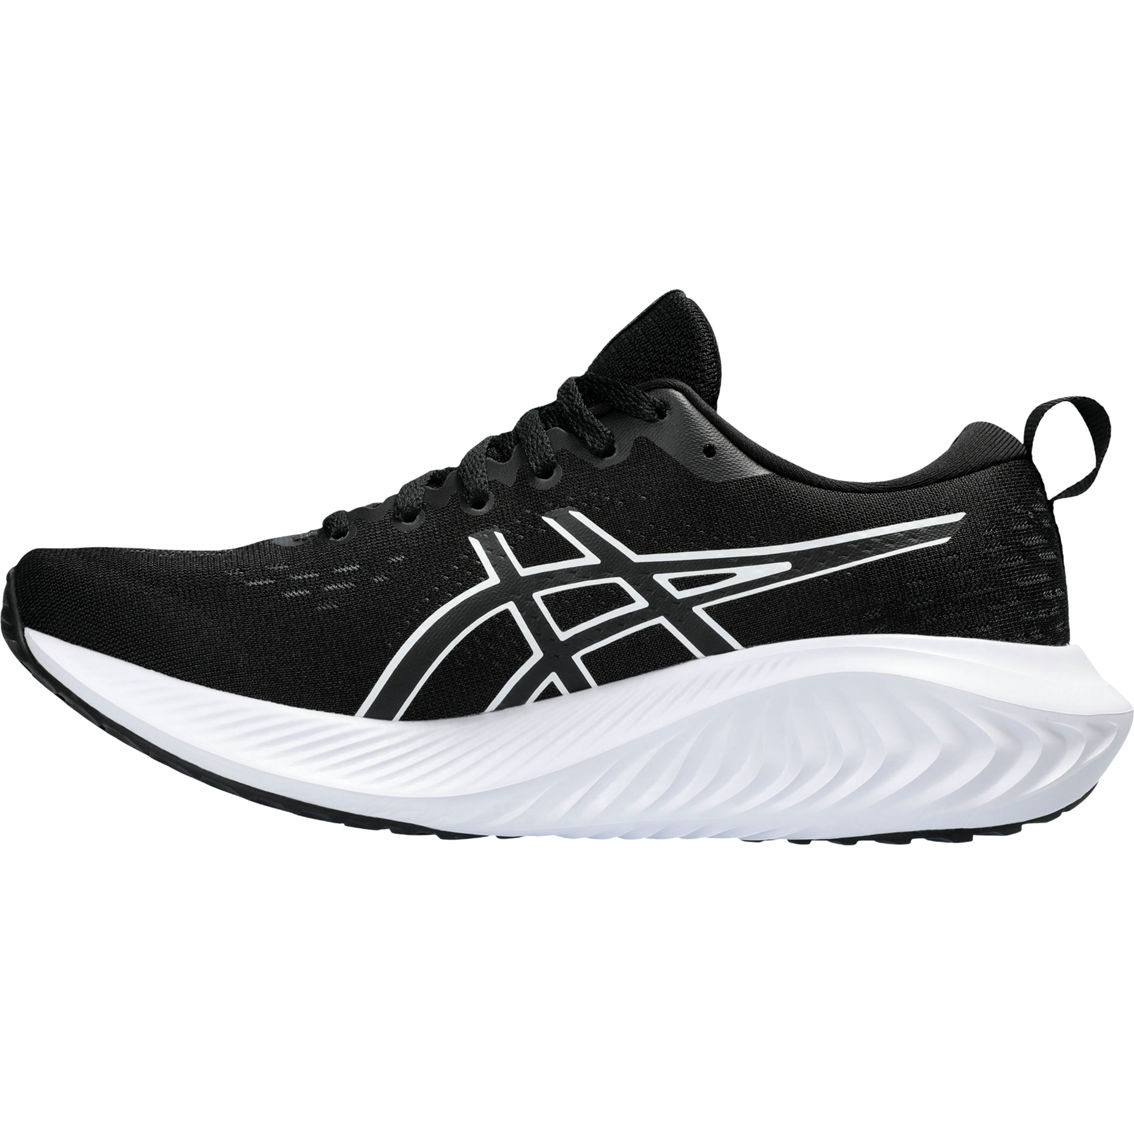 ASICS Women's GEL-Excite 10 Running Shoes - Image 2 of 5